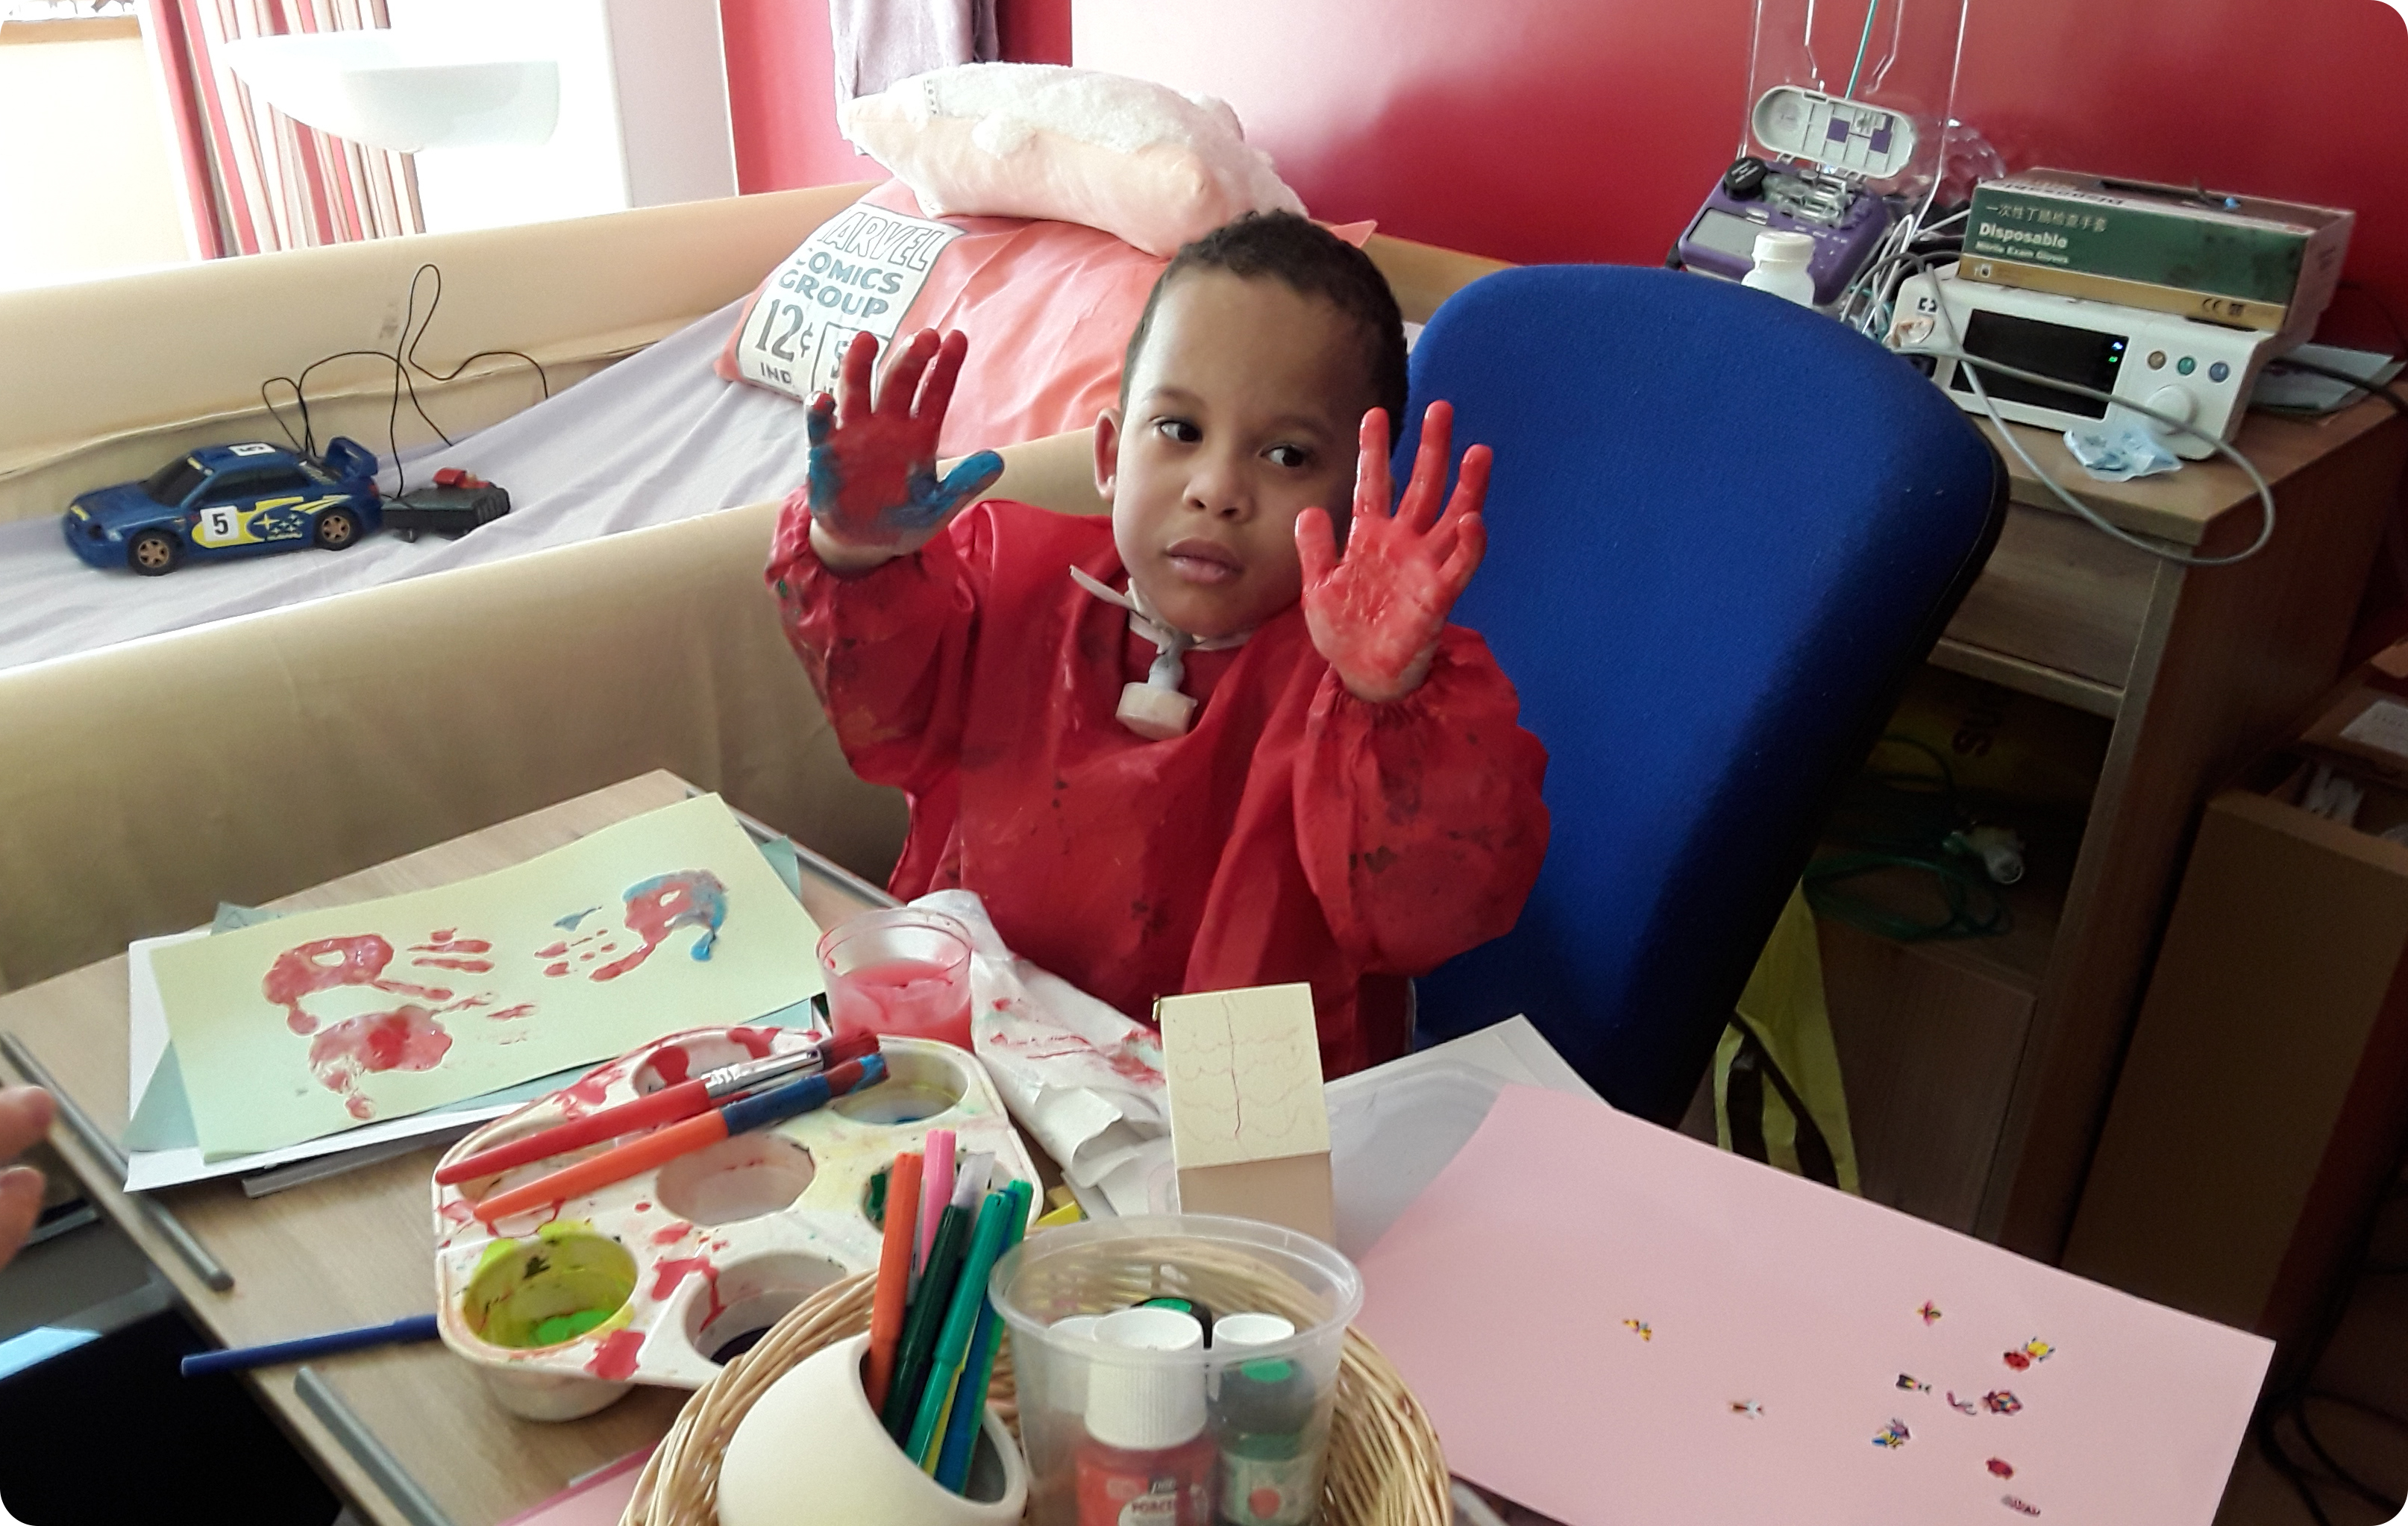 Picture of a young child painting, they are looking at the camera with their painted hands up